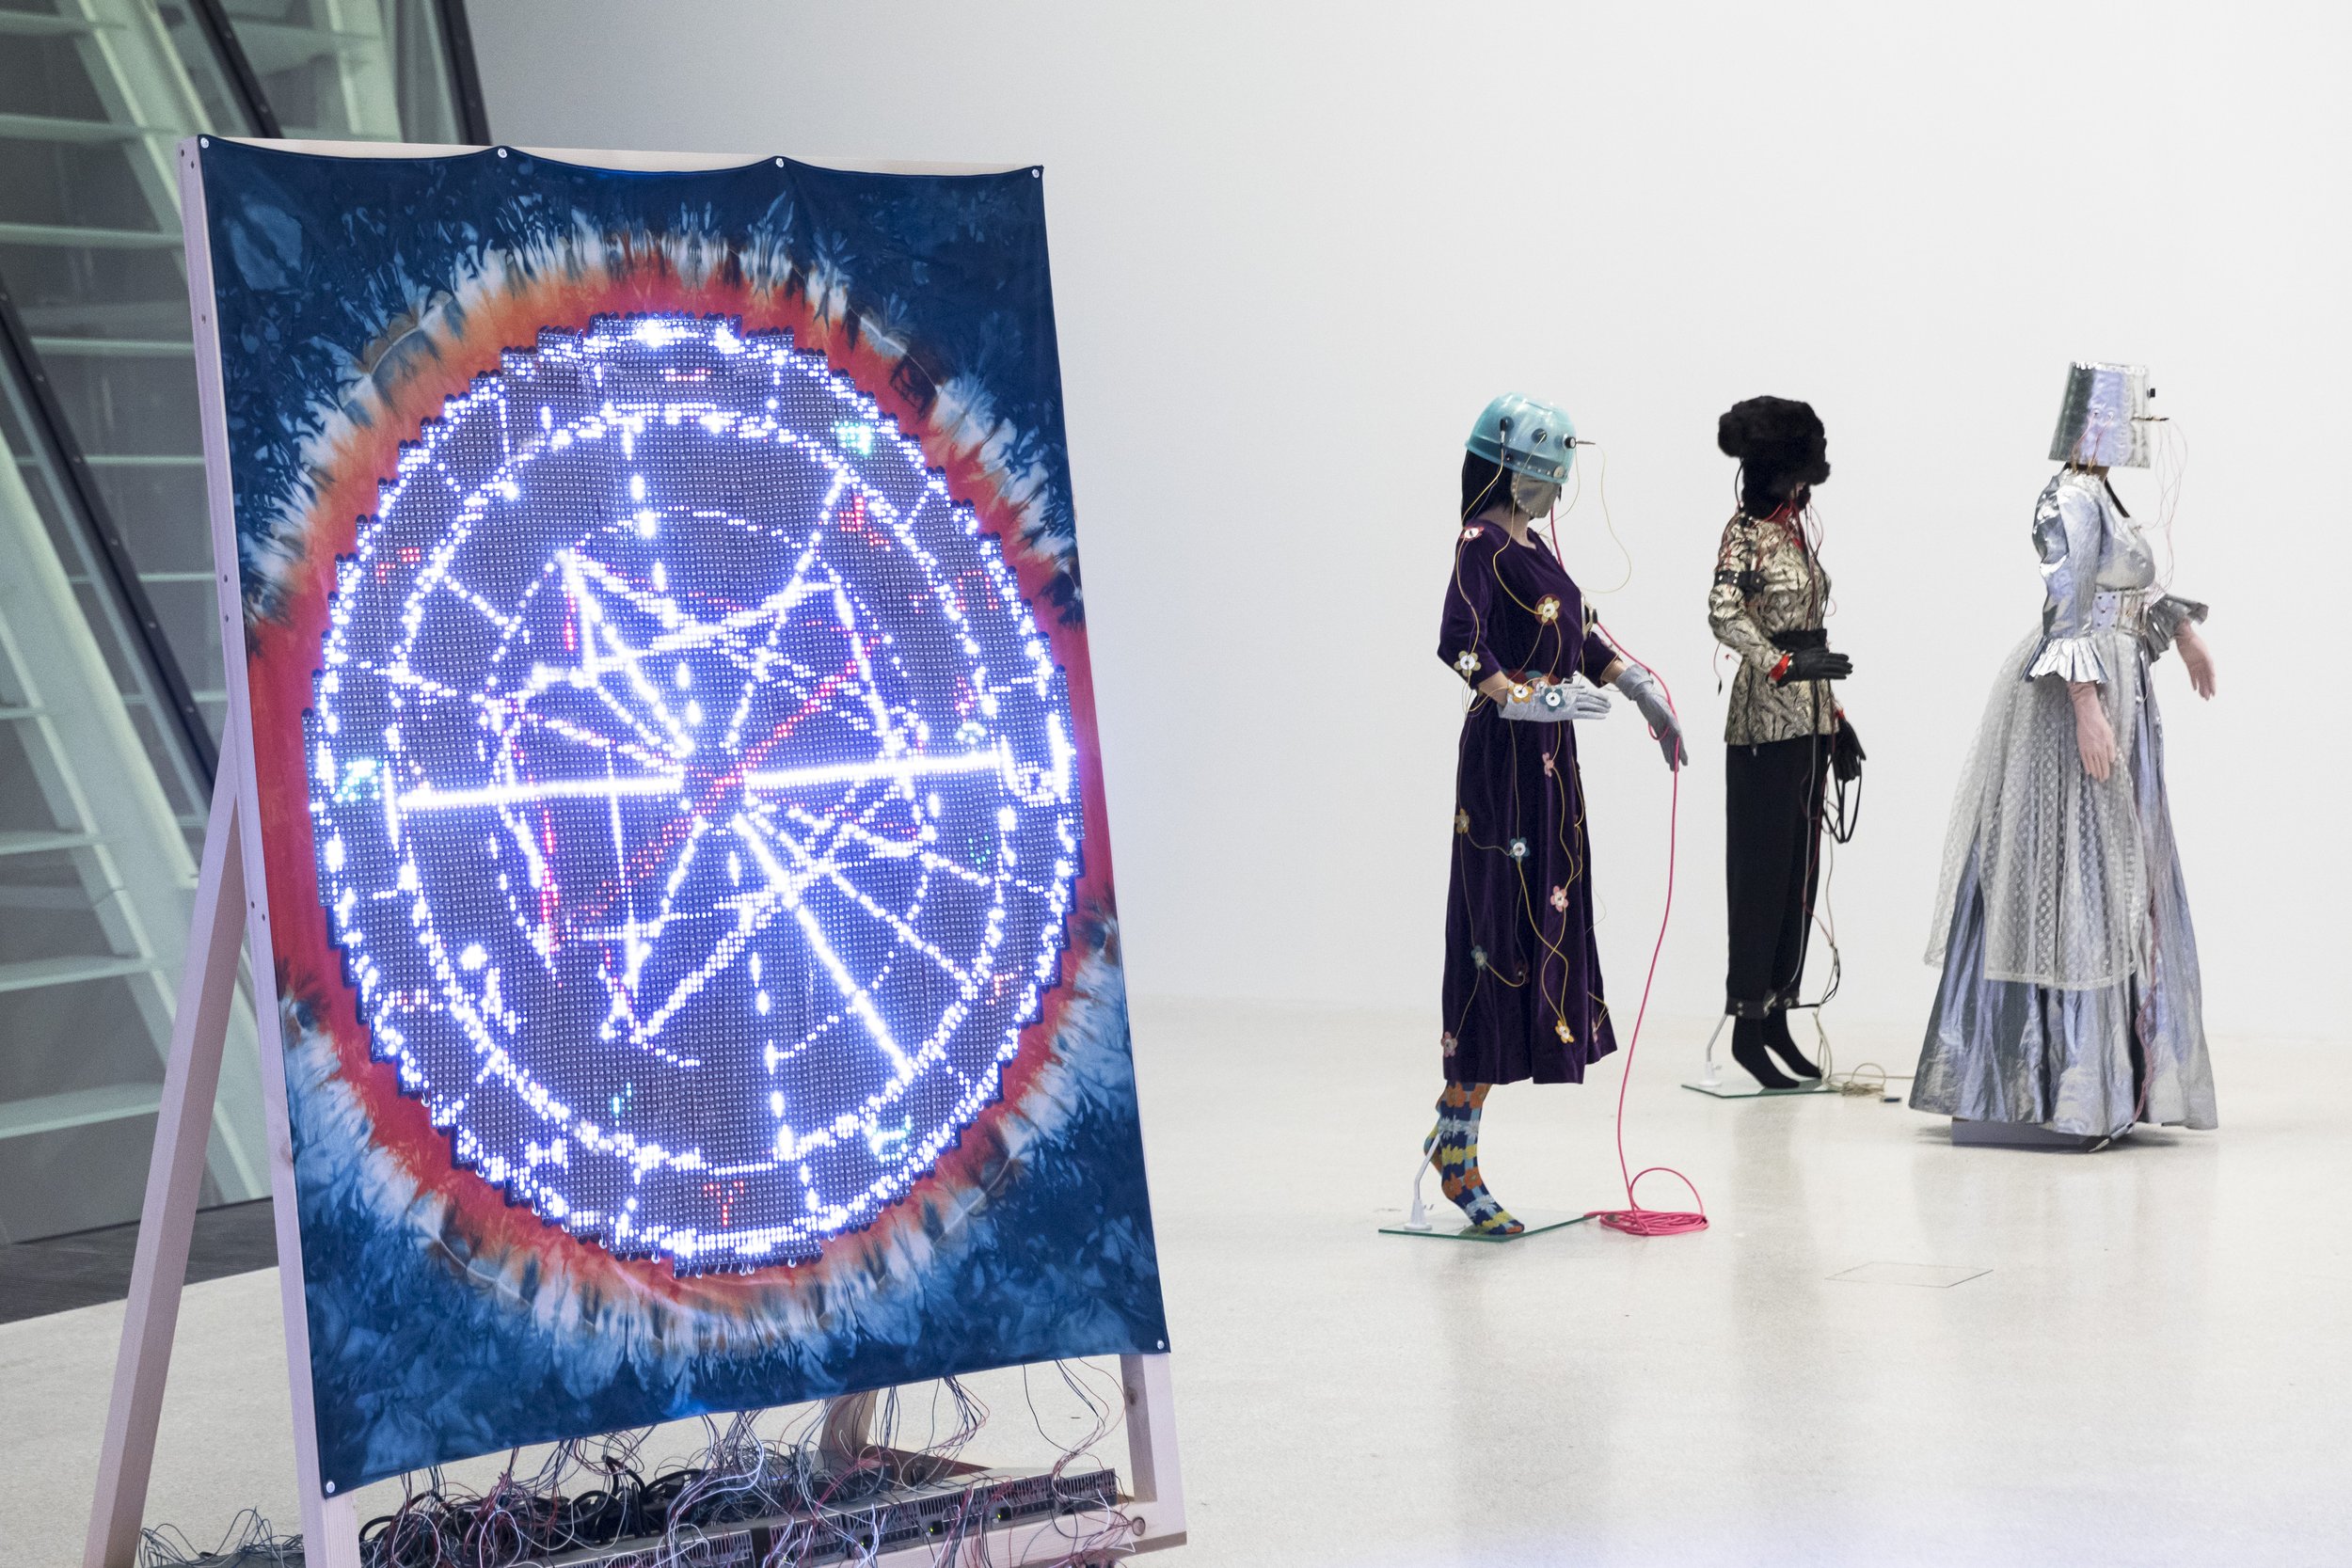  Ei Arakawa,  Performance People,  2018/2019 (left), and Suzanne Treister,  Rosalind Brodsky’s Electronic Time Travelling Costumes , 1995-1997 exhibition view  HOPE . Museion 